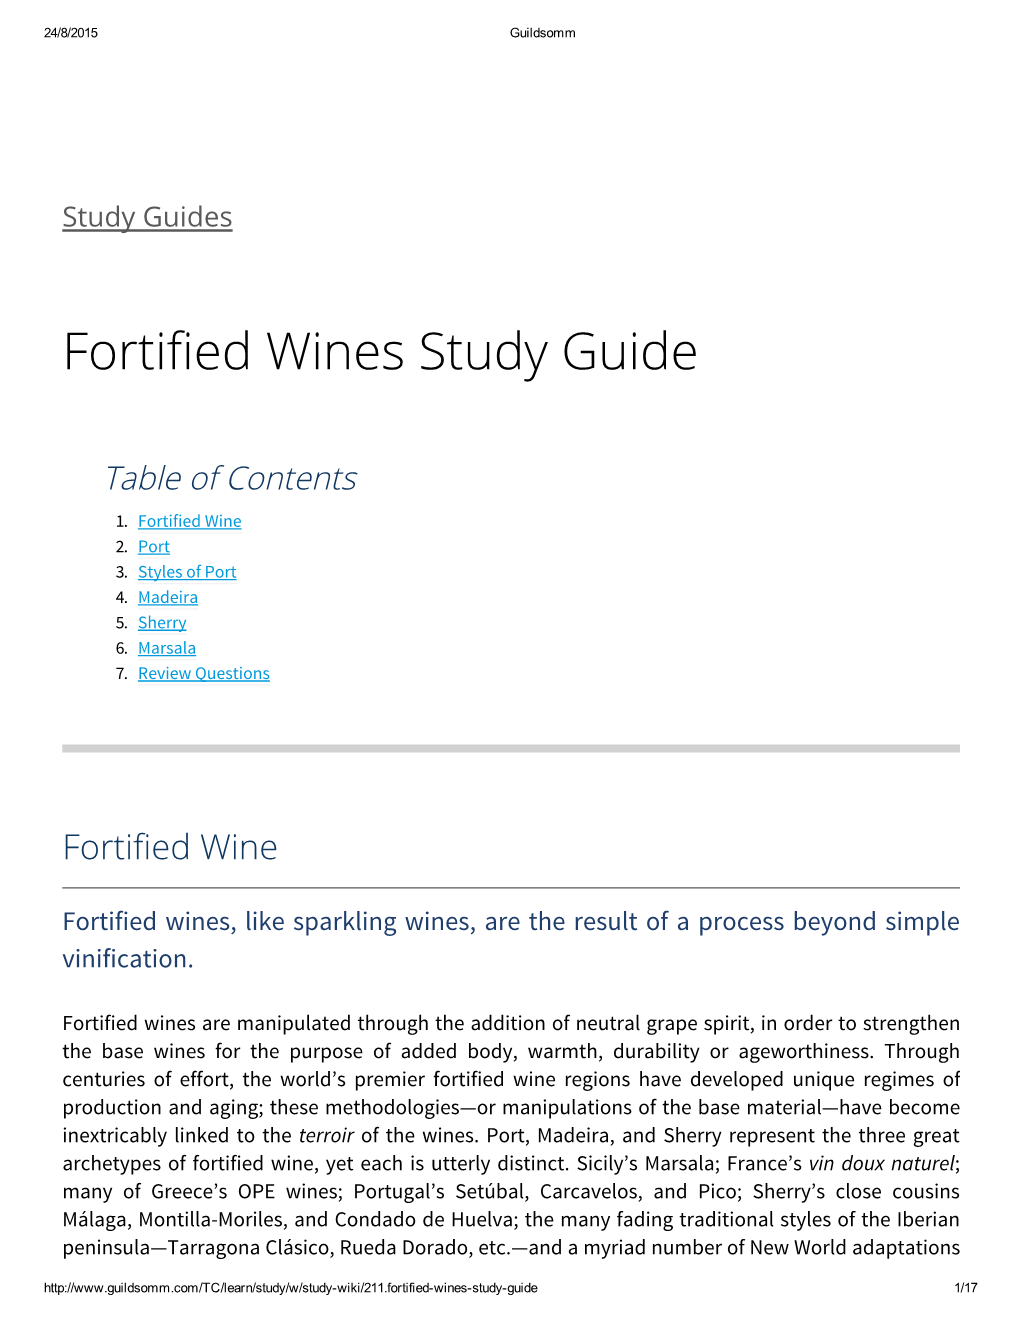 Forti㔰〼ed Wines Study Guide